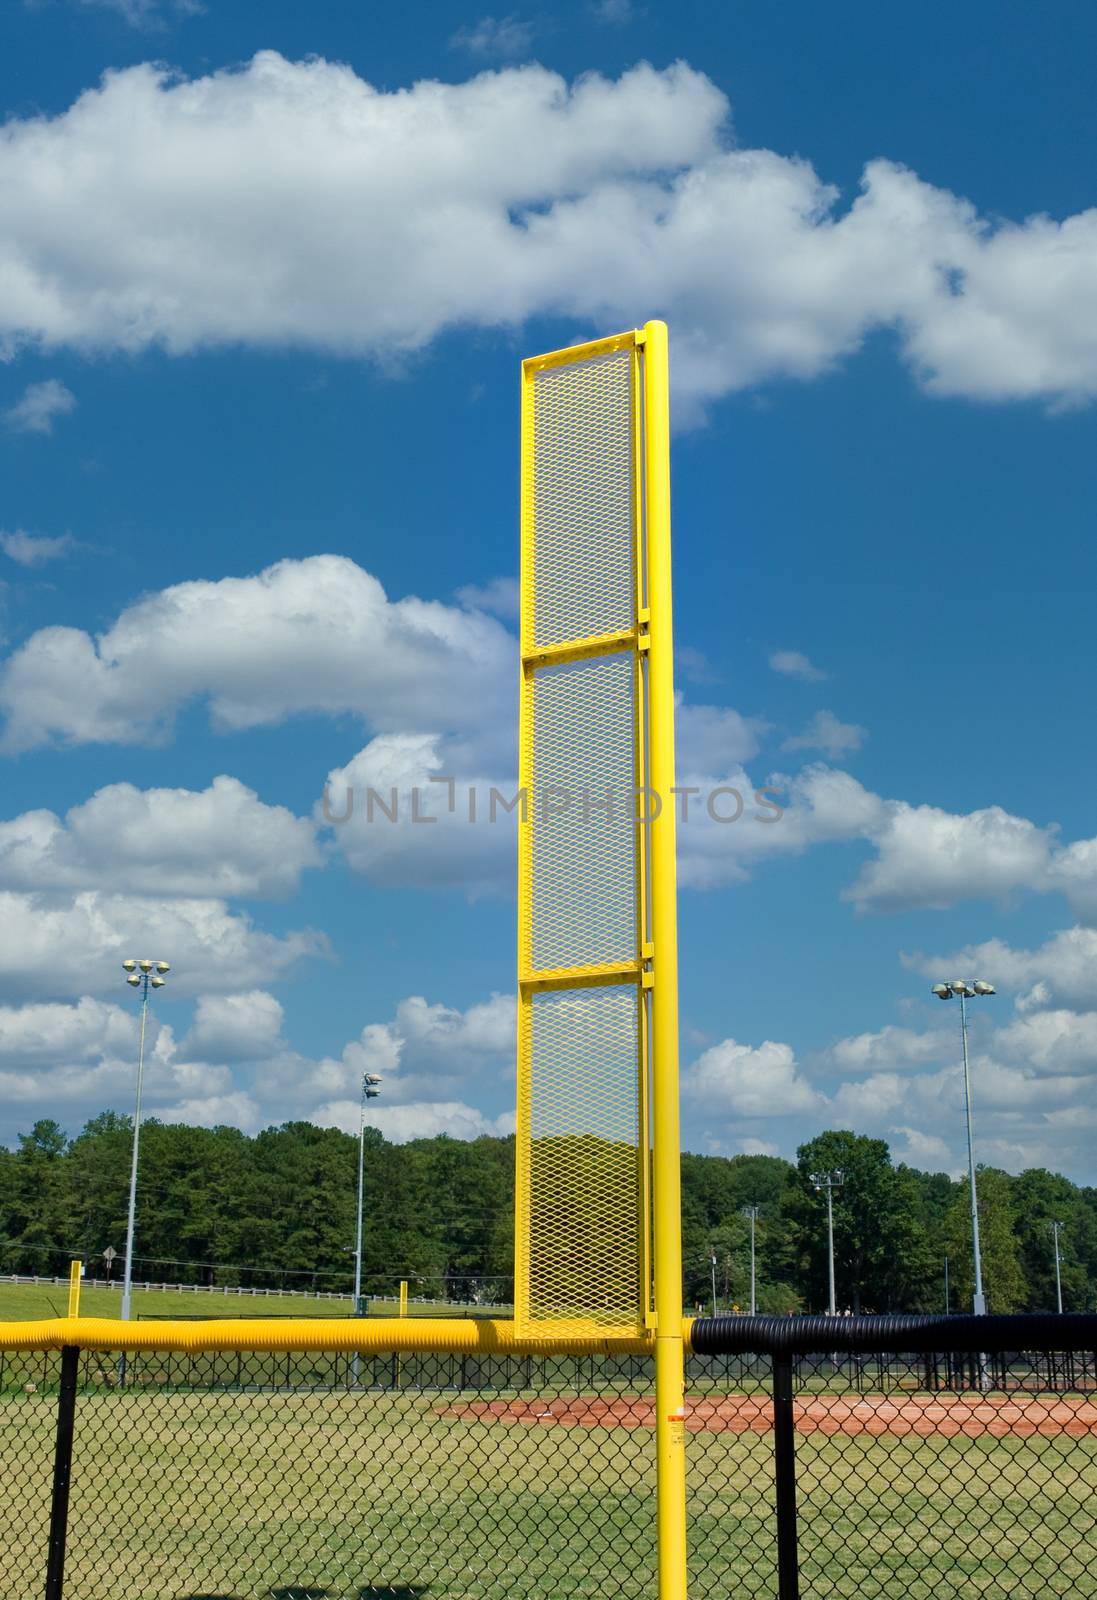 A bright yellow foul ball pole in a baseball field against blue sky